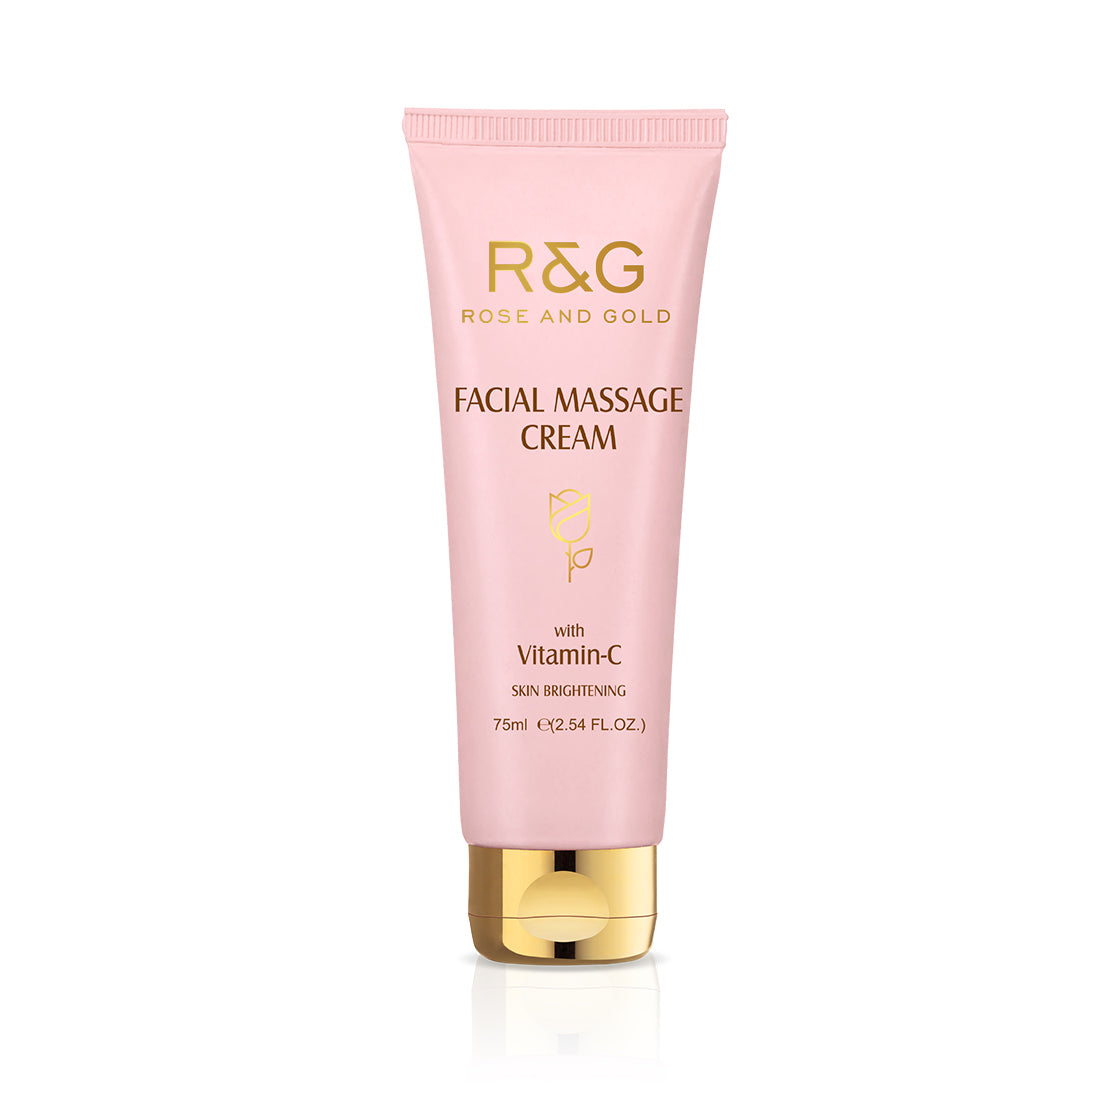 R&G Facial Massage Cream For Skin Brightening - Enriched with Vitamin C - Brightens & Tones Sun Damaged Skin - Gives Visible Glow For a Refreshing Look - VasuStore